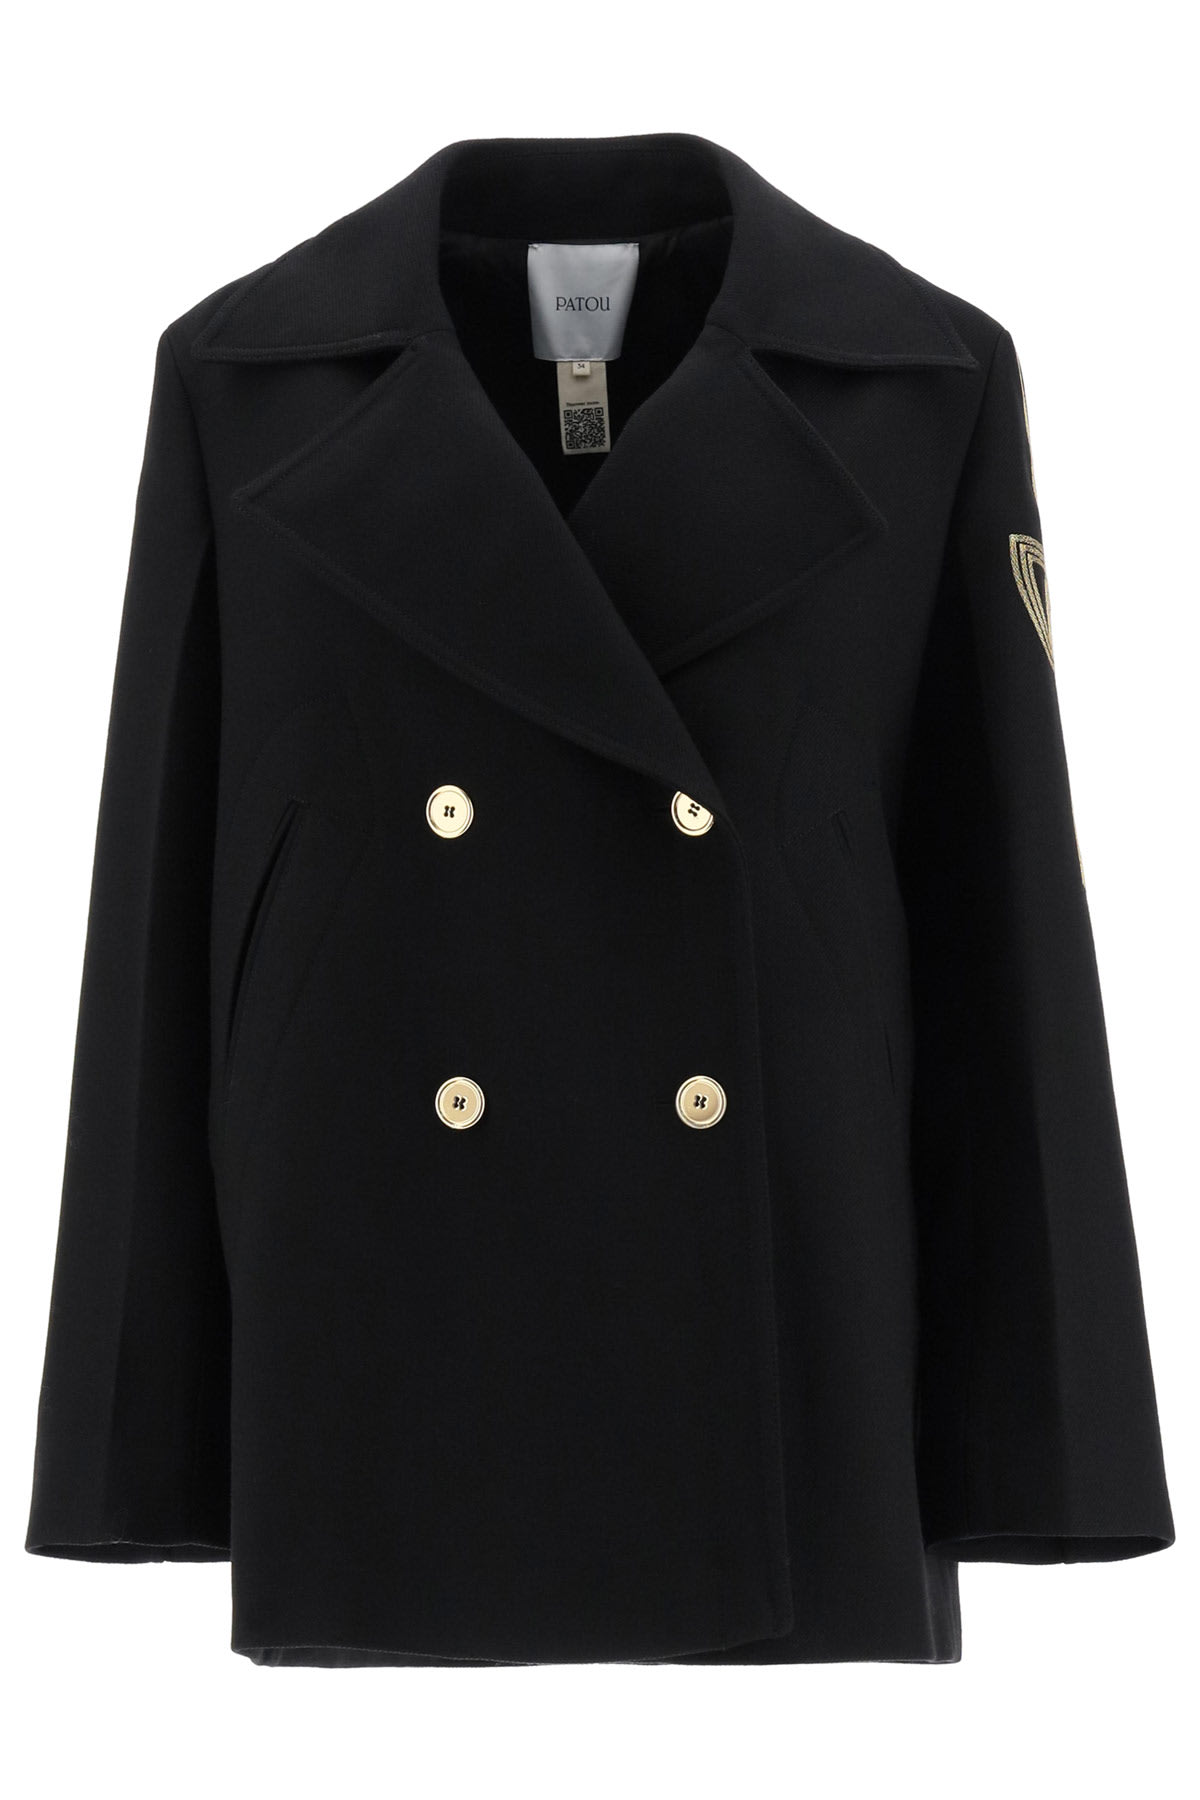 Patou Peacoat With Embroidered Logo